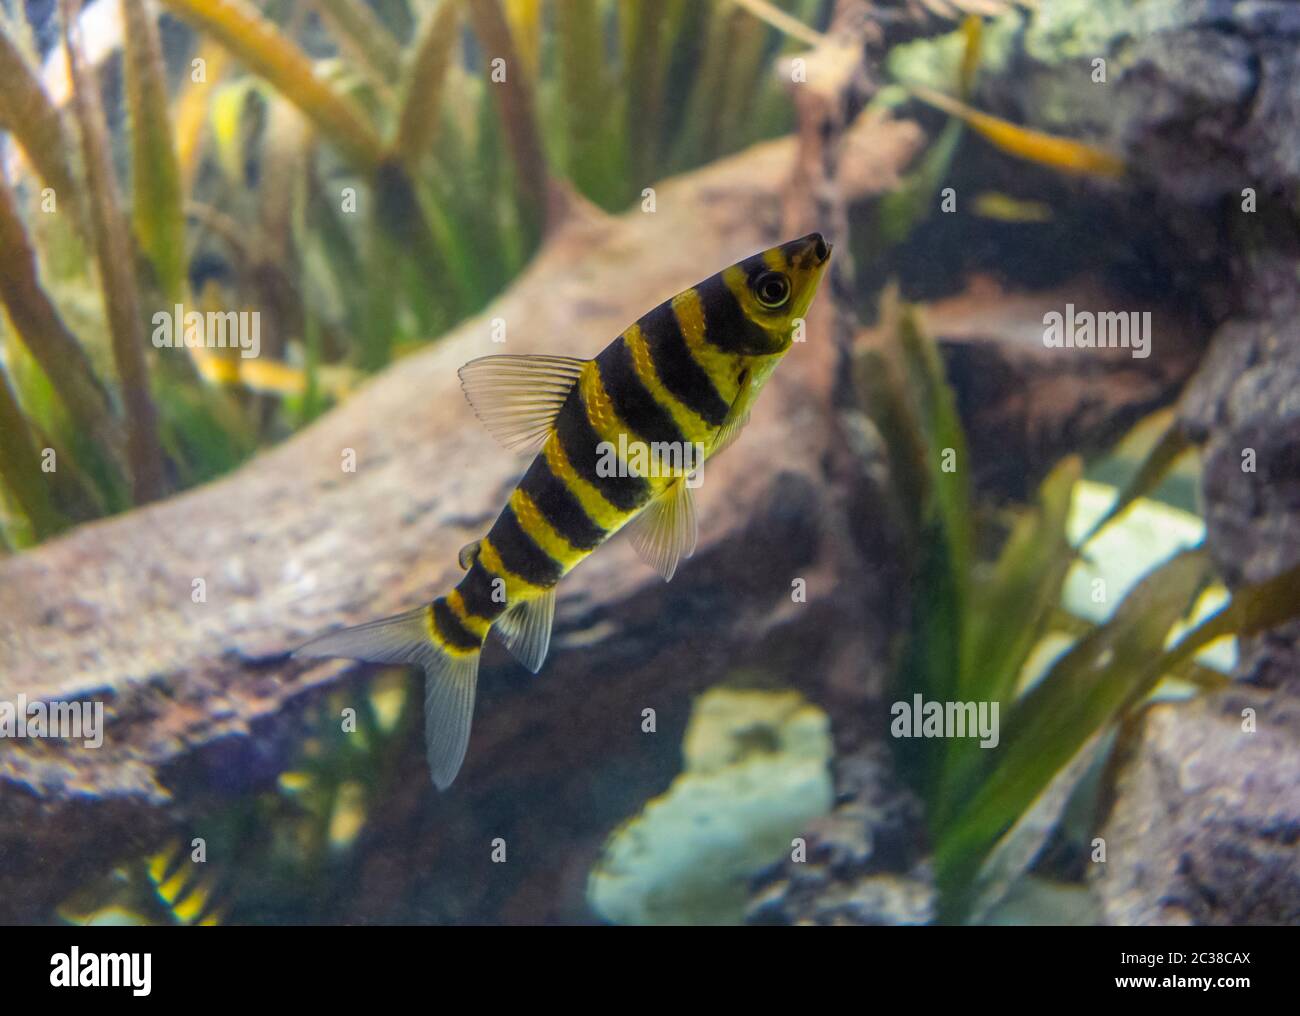 underwater scenery showing some banded leporinus fishes in natural ambiance Stock Photo